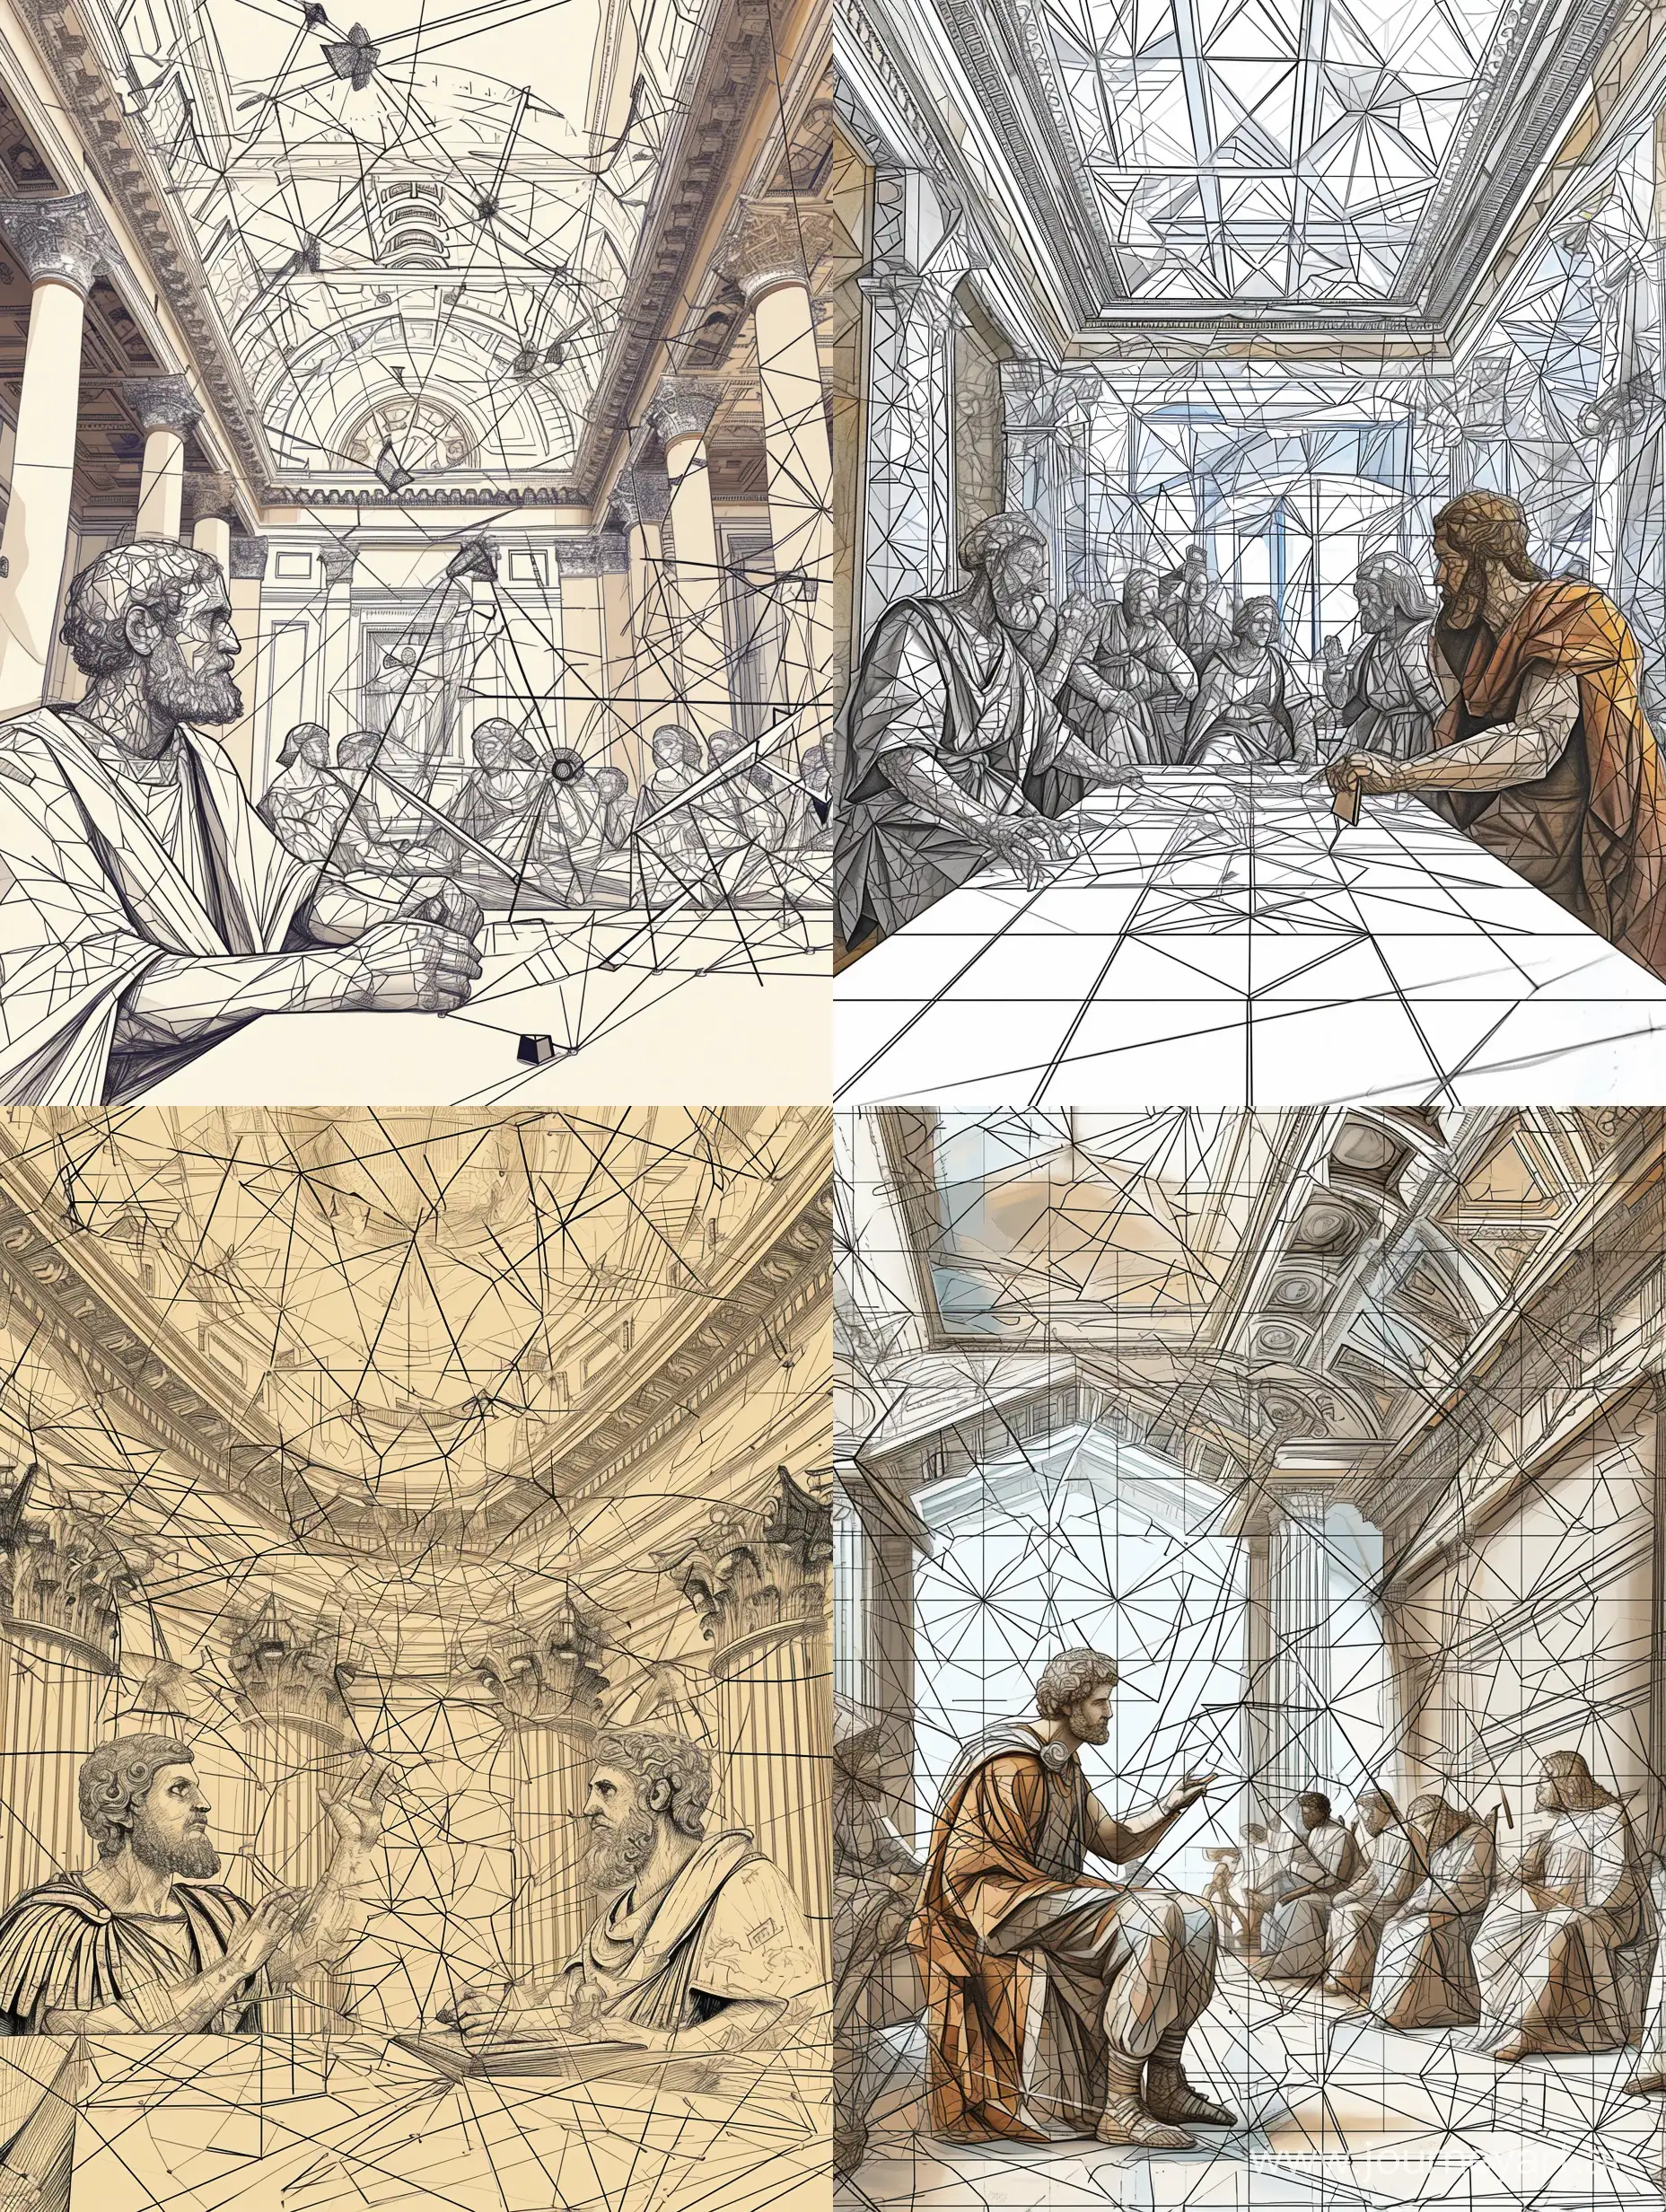 Generate a visually striking scene, depicting Euclid instructing peers in Euclidean Geometry within a Baroque building. Employ thin black lines in the Da Vinci style . Euclid should be rendered adopting a Greek style as he examines geometric figures. Populate the background and ceiling with diverse geometric elements such as triangles, squares, theorems, circles.